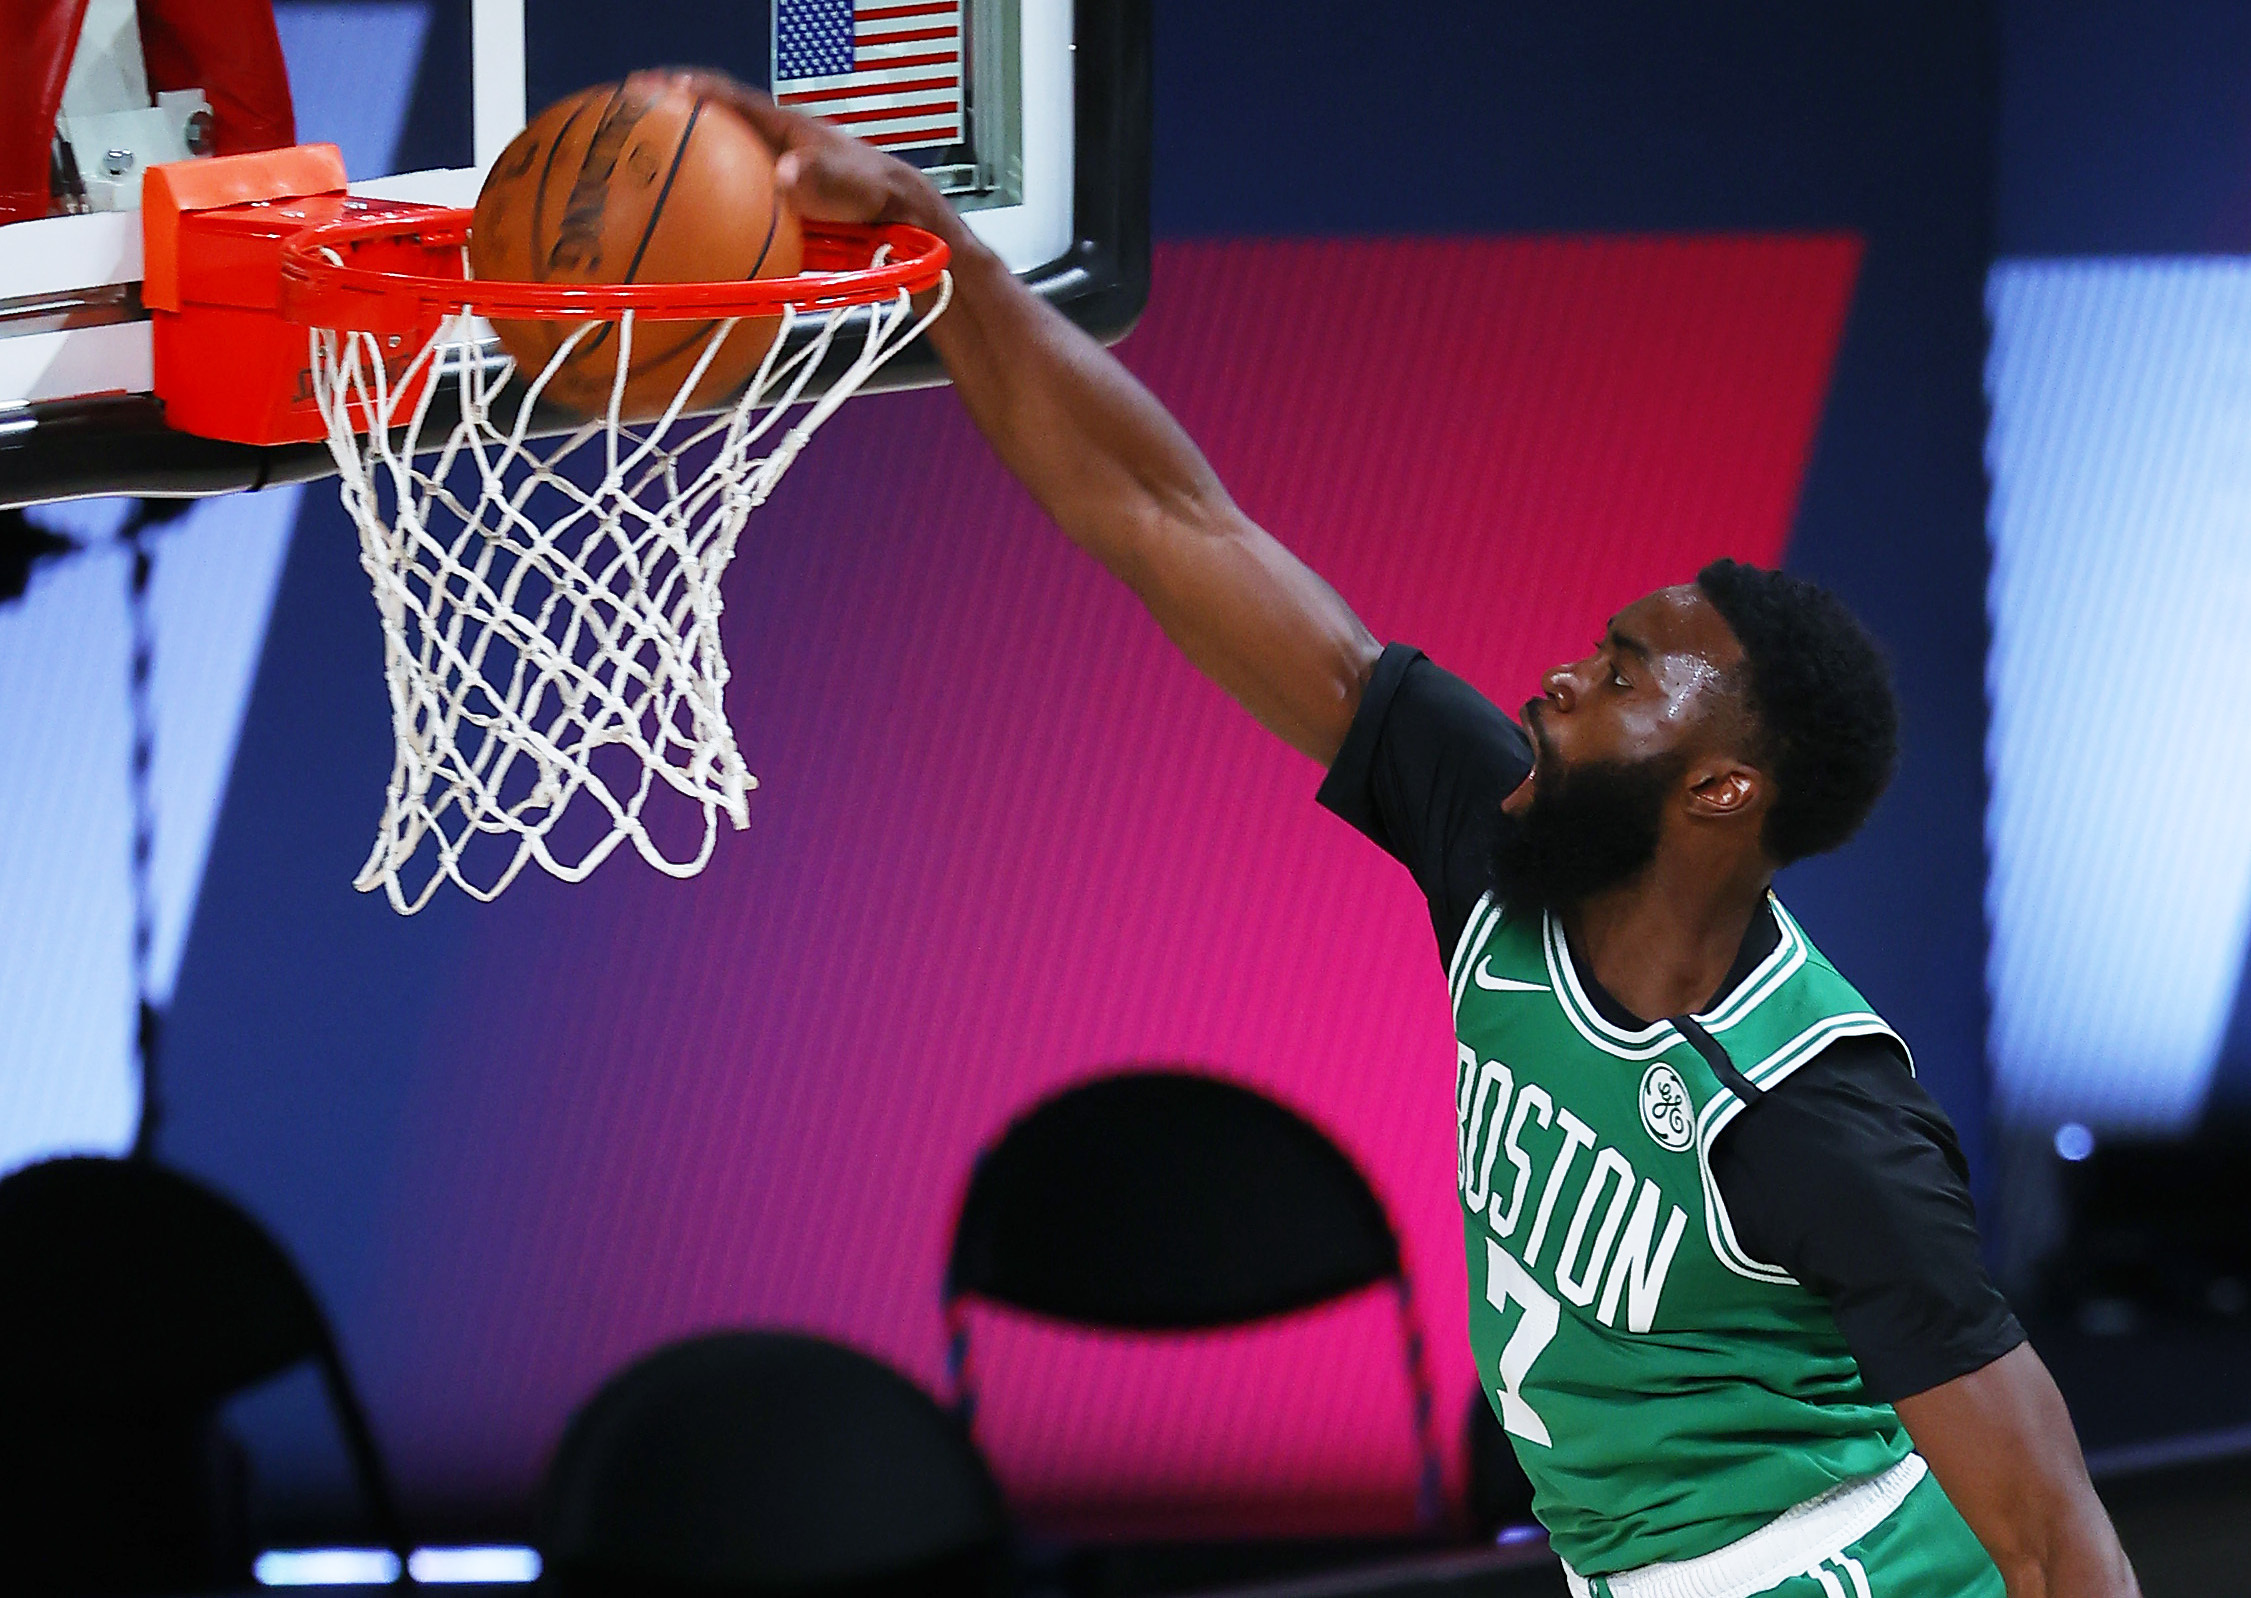 How the Celtics blew a big lead, then hung on to edge the Trail